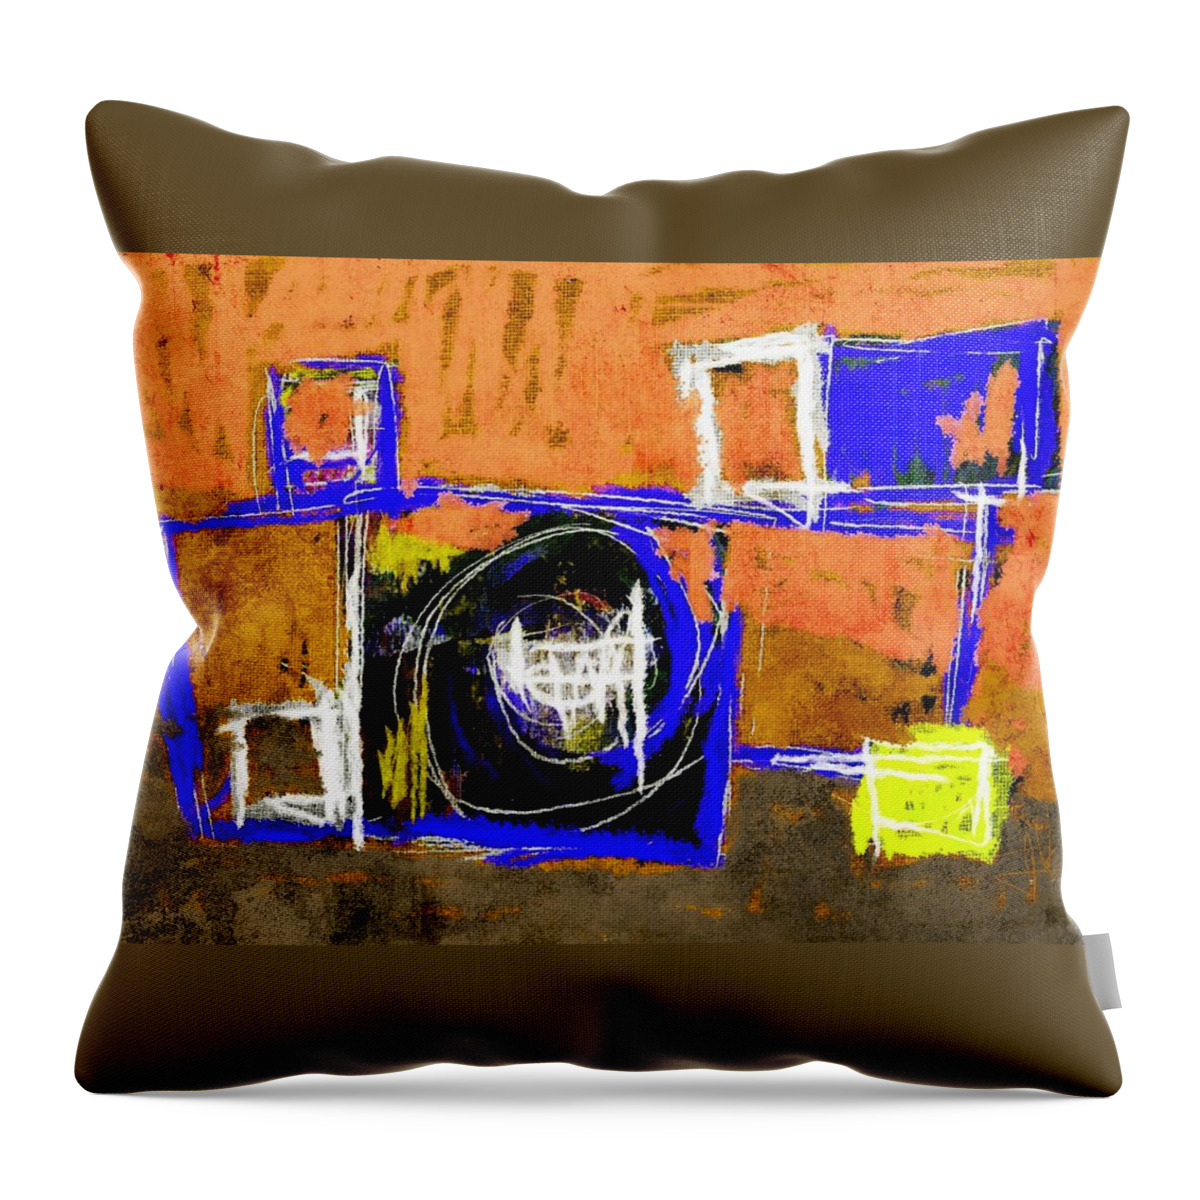 Abstract Throw Pillow featuring the digital art Abstract July 27 2015 by Jim Vance